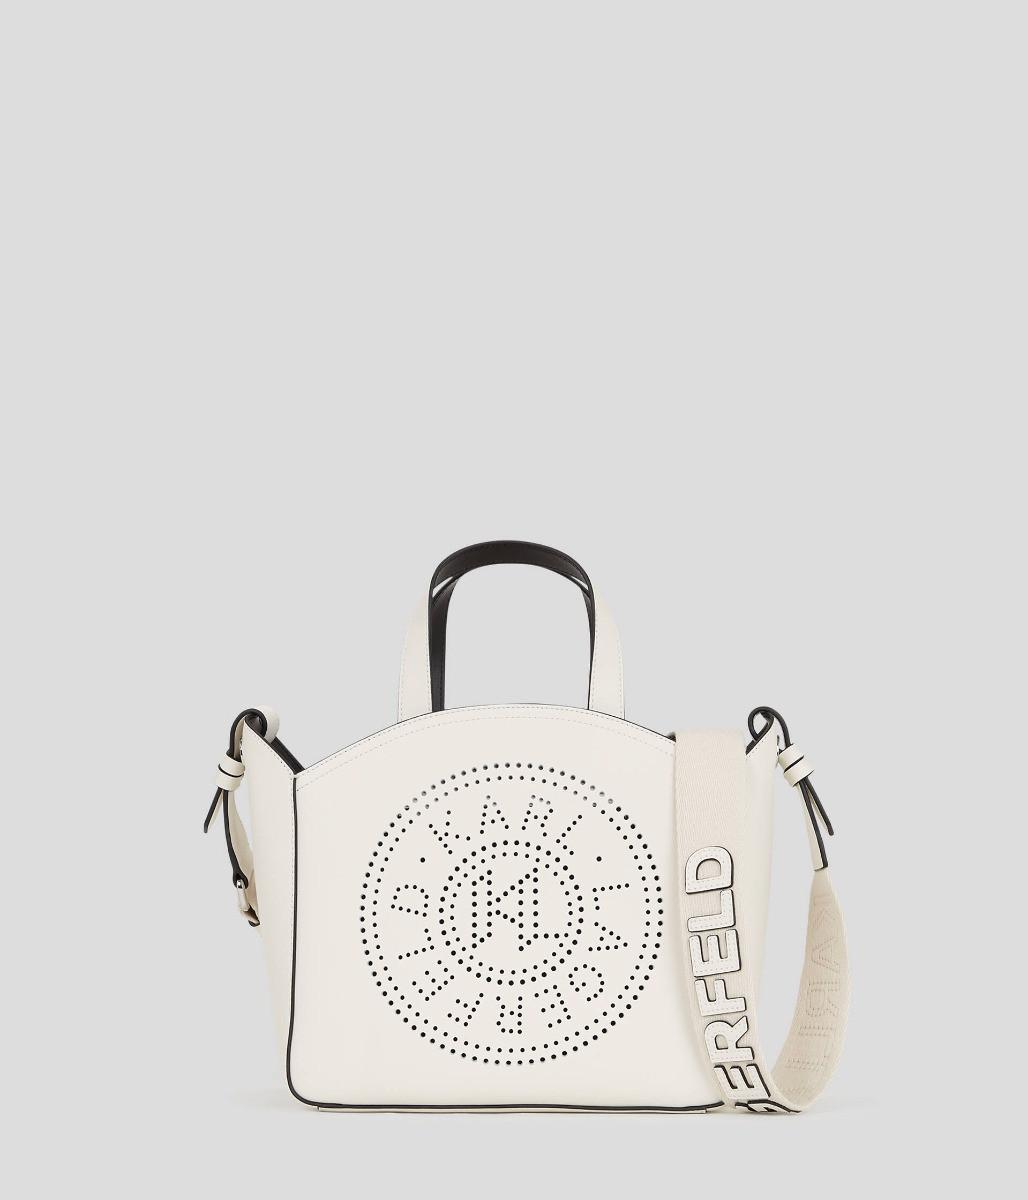 Circle Tote Perforated Damen Offwhite ONE SIZE von KARL LAGERFELD